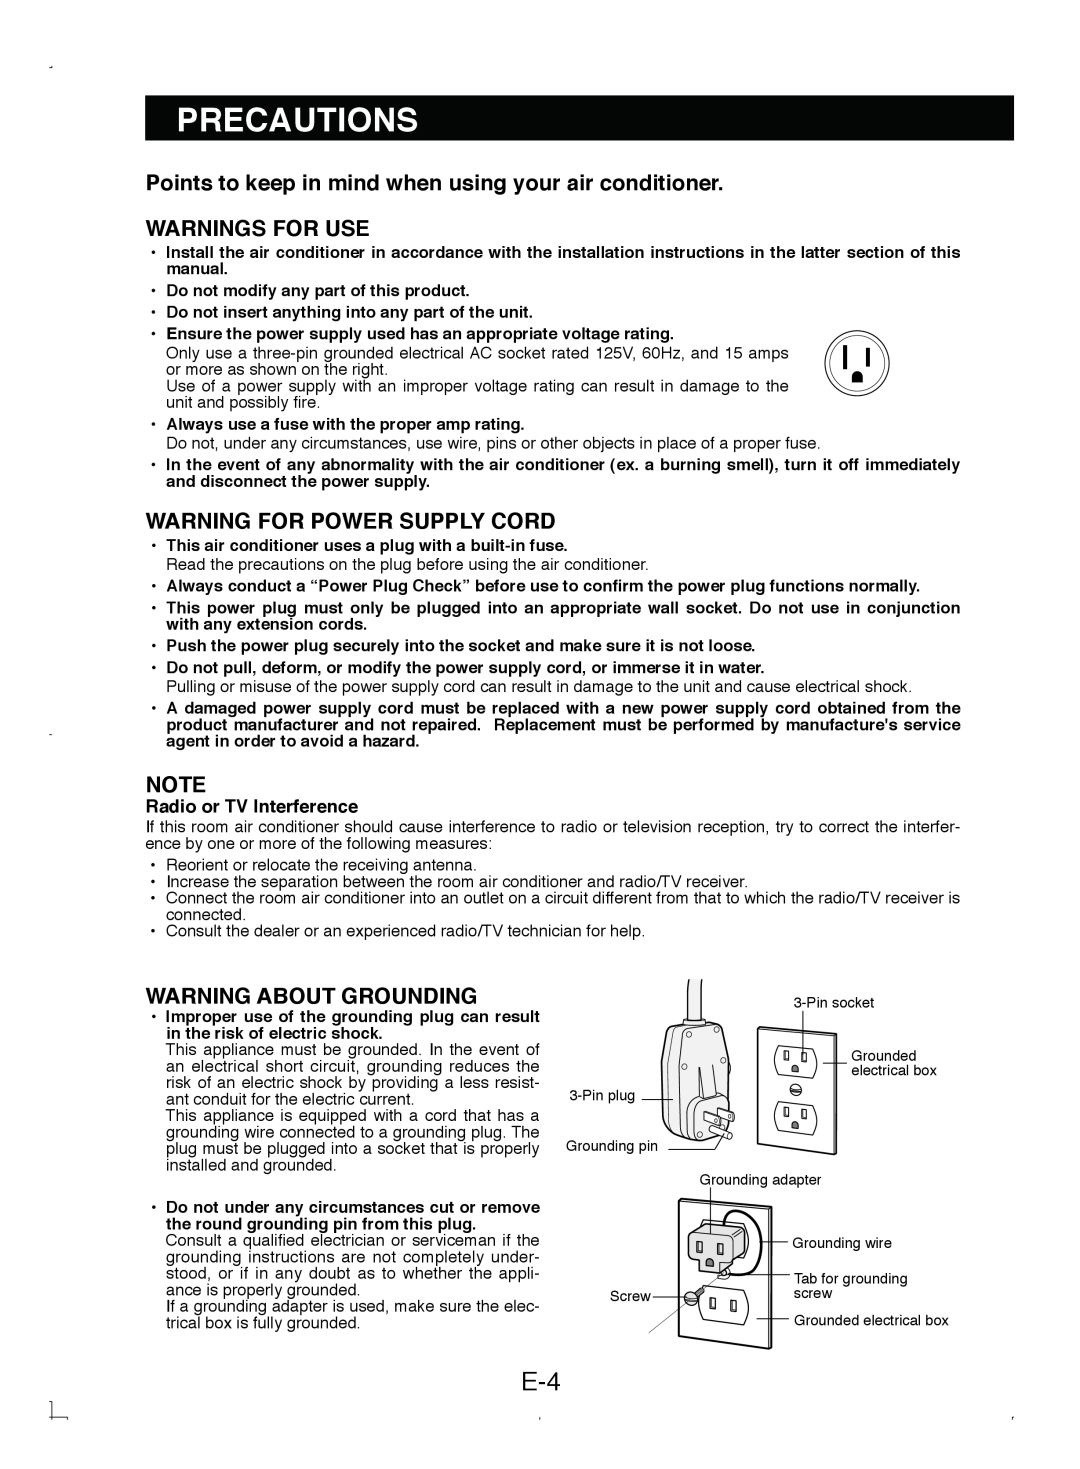 Sony CV-P12PX operation manual Precautions, Warnings For Use, Warning For Power Supply Cord, Warning About Grounding 